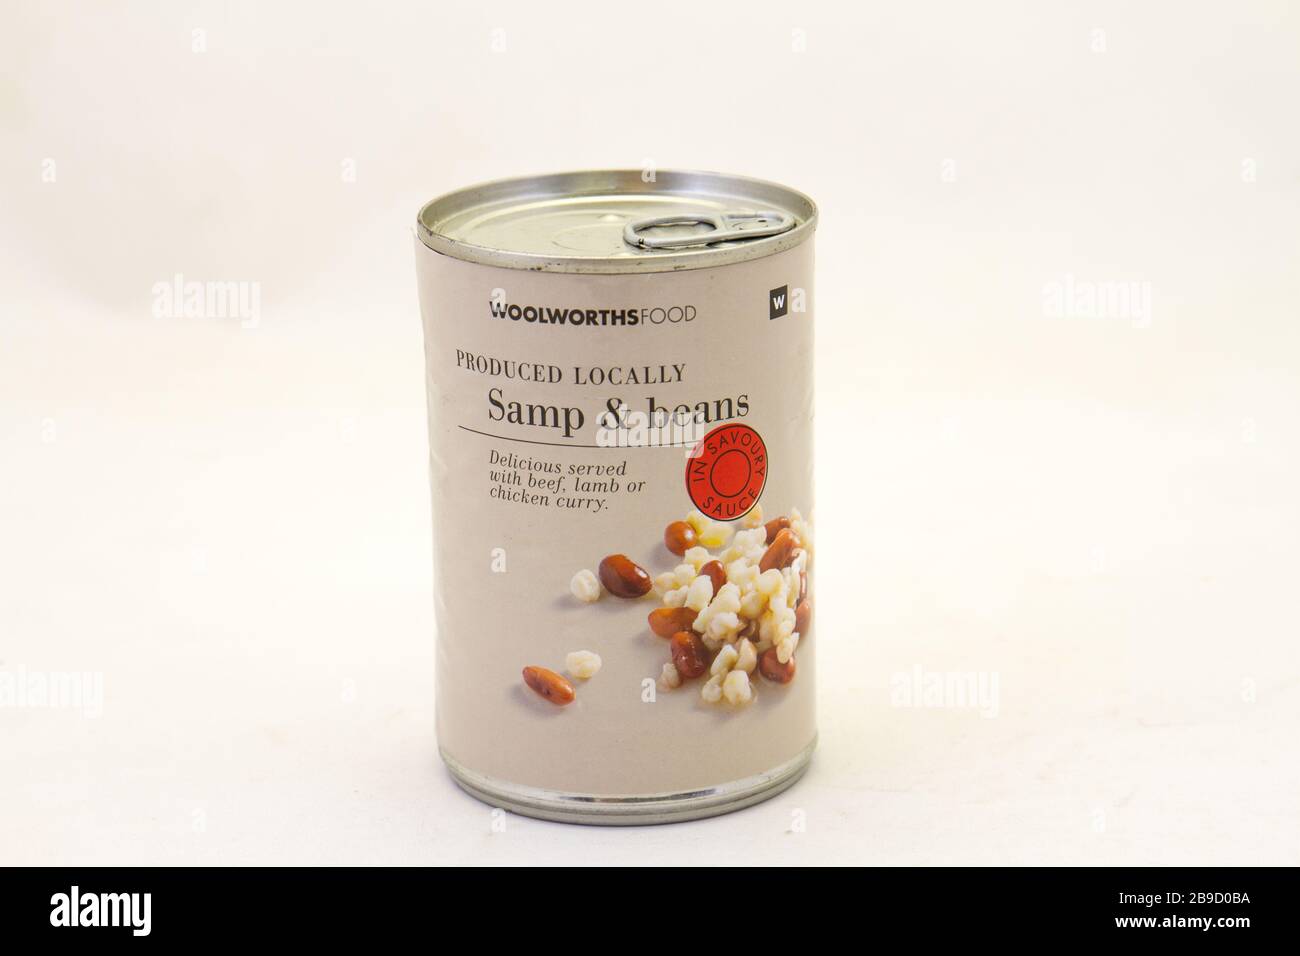 Alberton, South Africa - a can of Woolworths Food samp and beans isolated  on a clear background image with copy space Stock Photo - Alamy